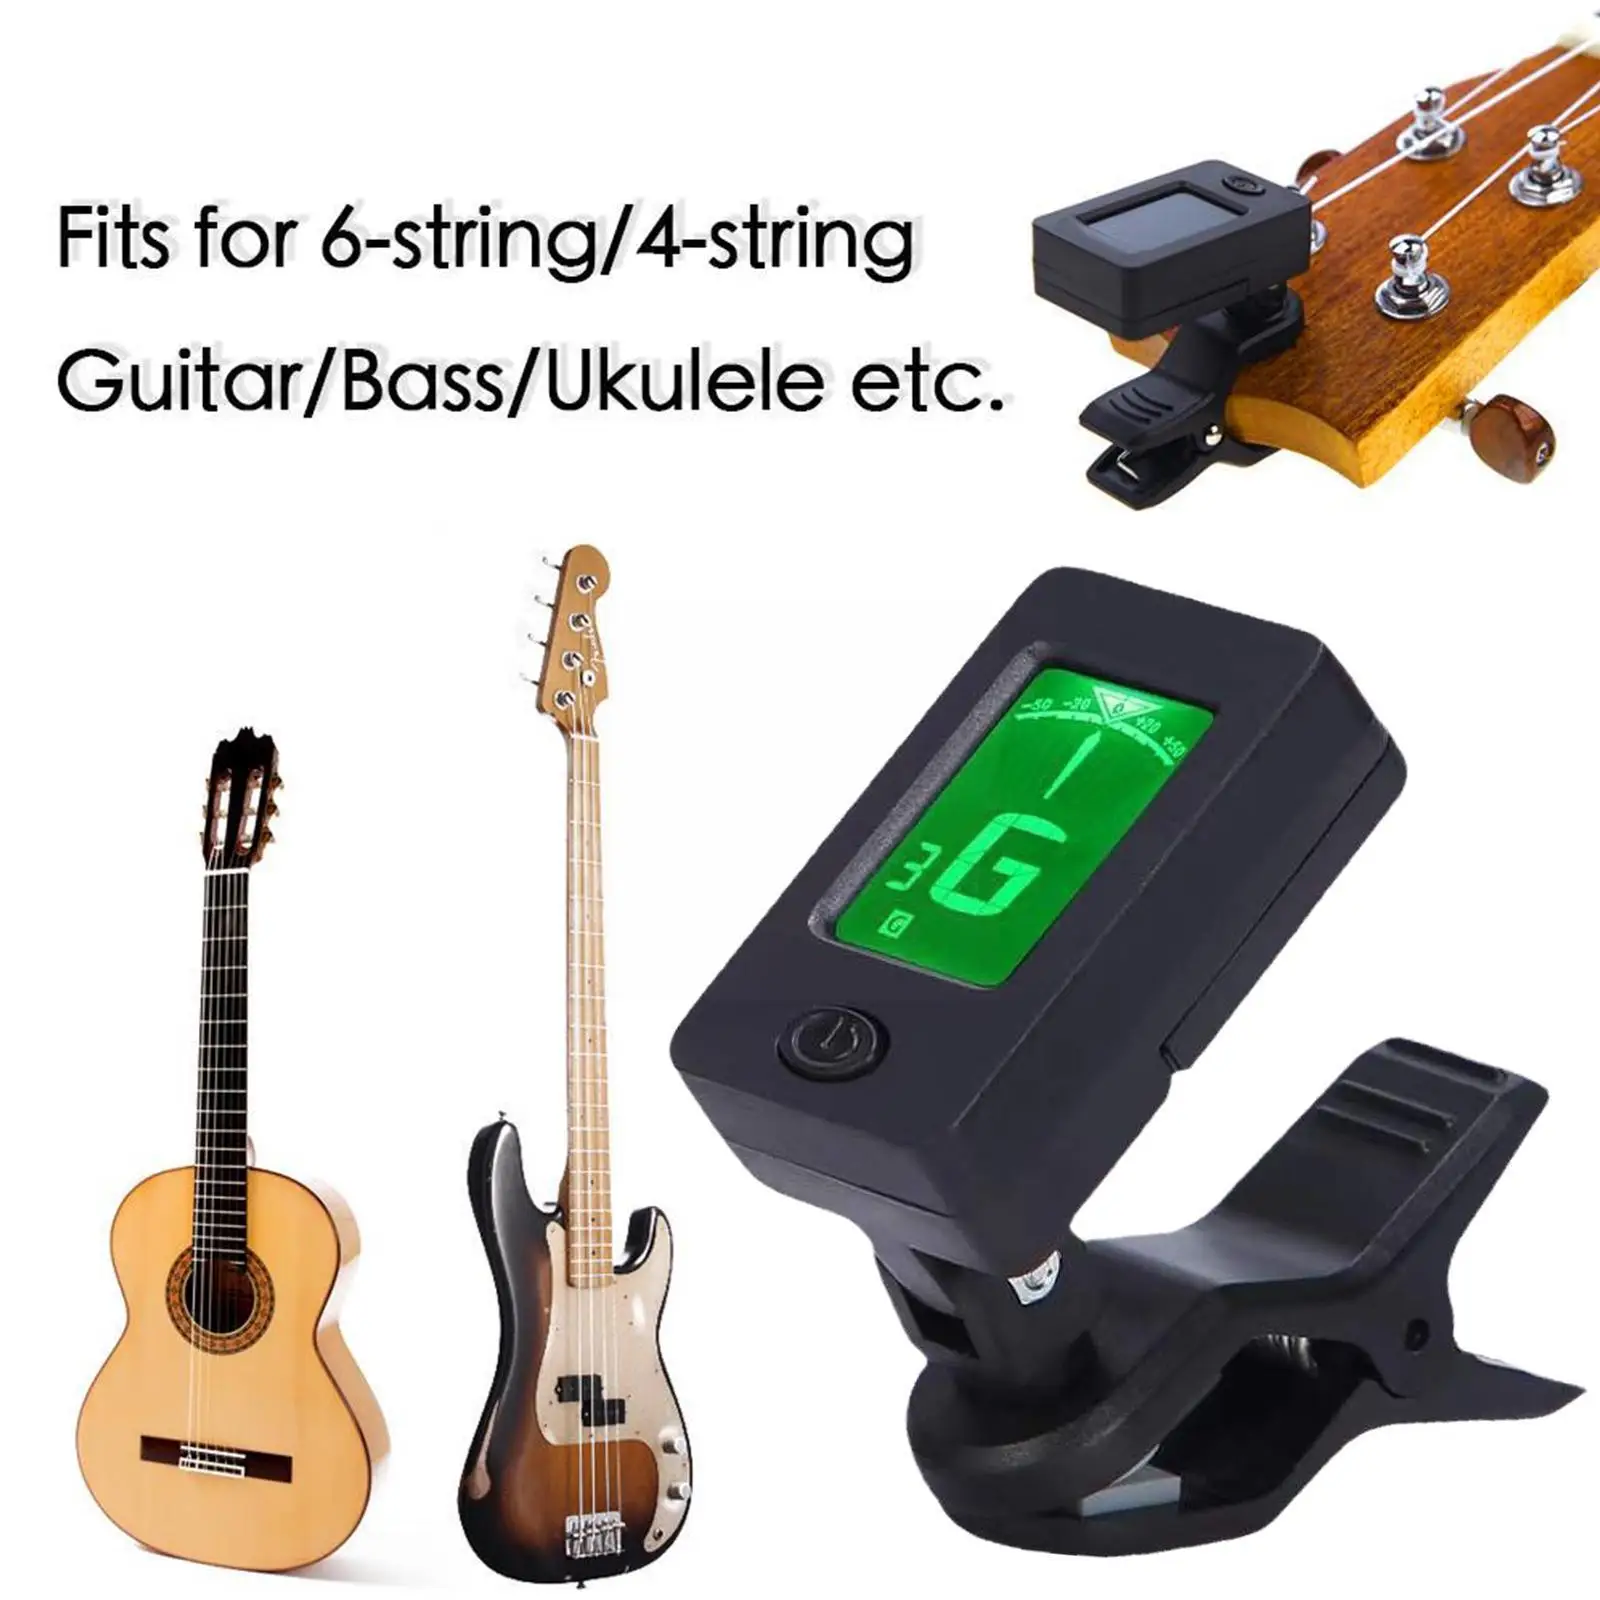 

Professional Clip-on 360 Degree Acoustic Guitar Tuner Lcd Screen Electric Digital Tuner For Acoustic Guitar Ukulele Accesso L5e9